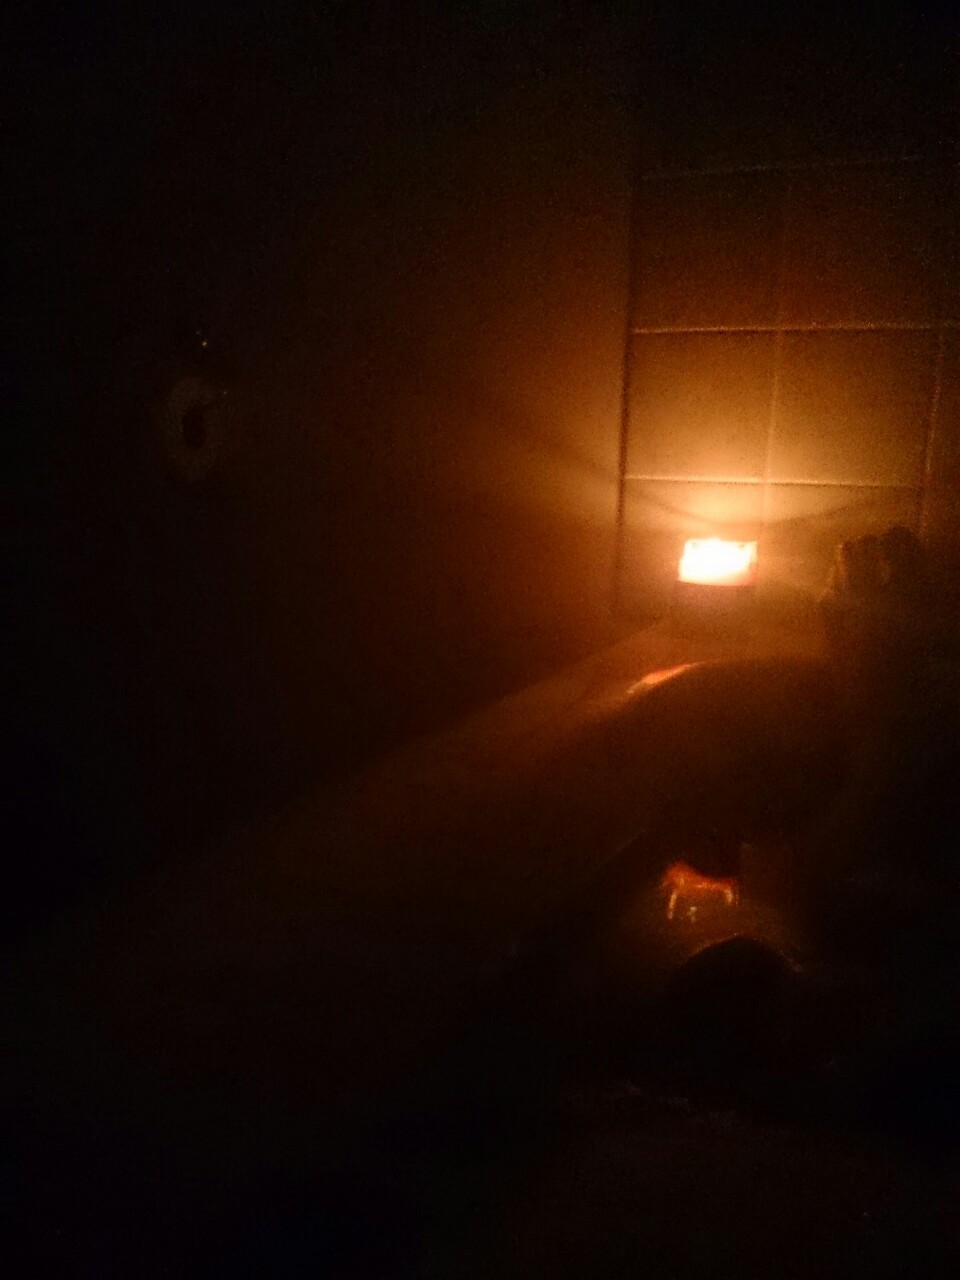 No flash. In tub. Really cold bathroom. Really hot water. The steam in the candle